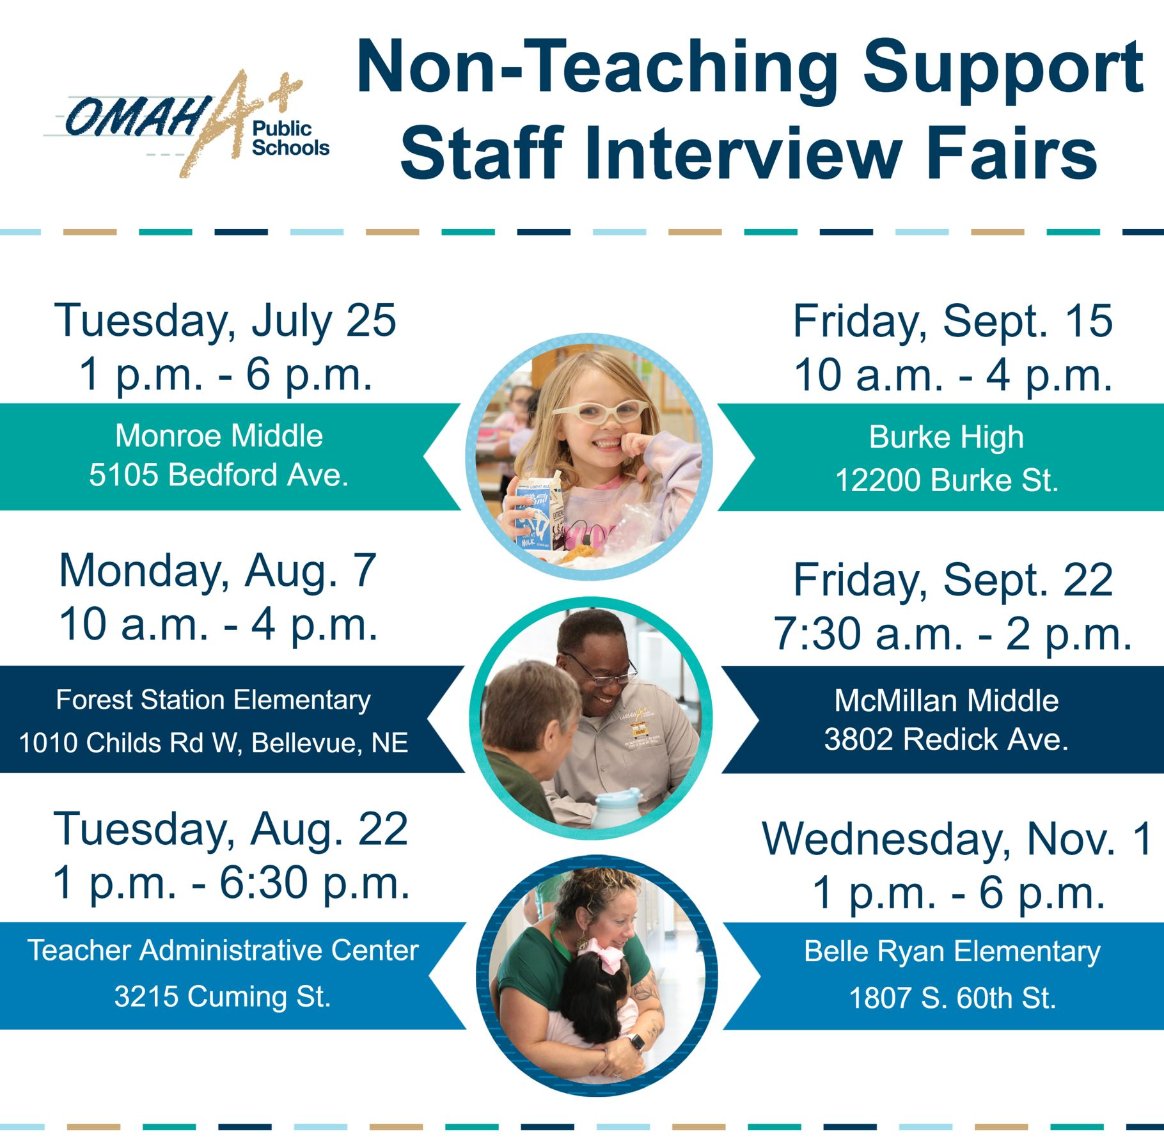 OPS is hiring and having a series of interview fairs. Check out these opportunities. Burke is hosting on September 15th 10 a.m. to 4 p.m. First up is Monroe Middle on July 25th 1 p.m. to 6 p.m.